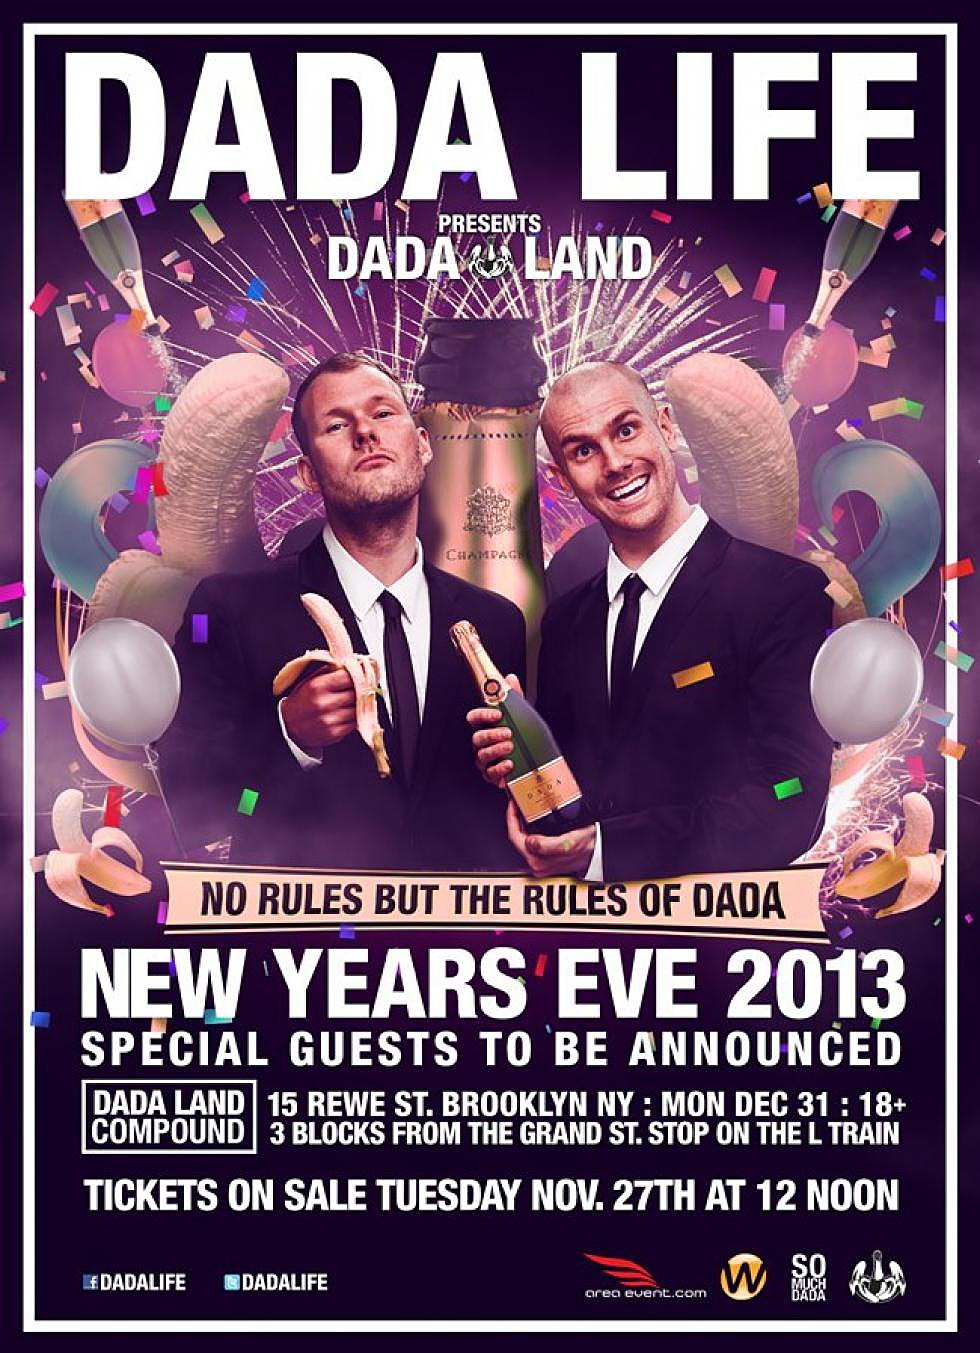 Dada Life to bring champagne and bananas to Brooklyn for New Years